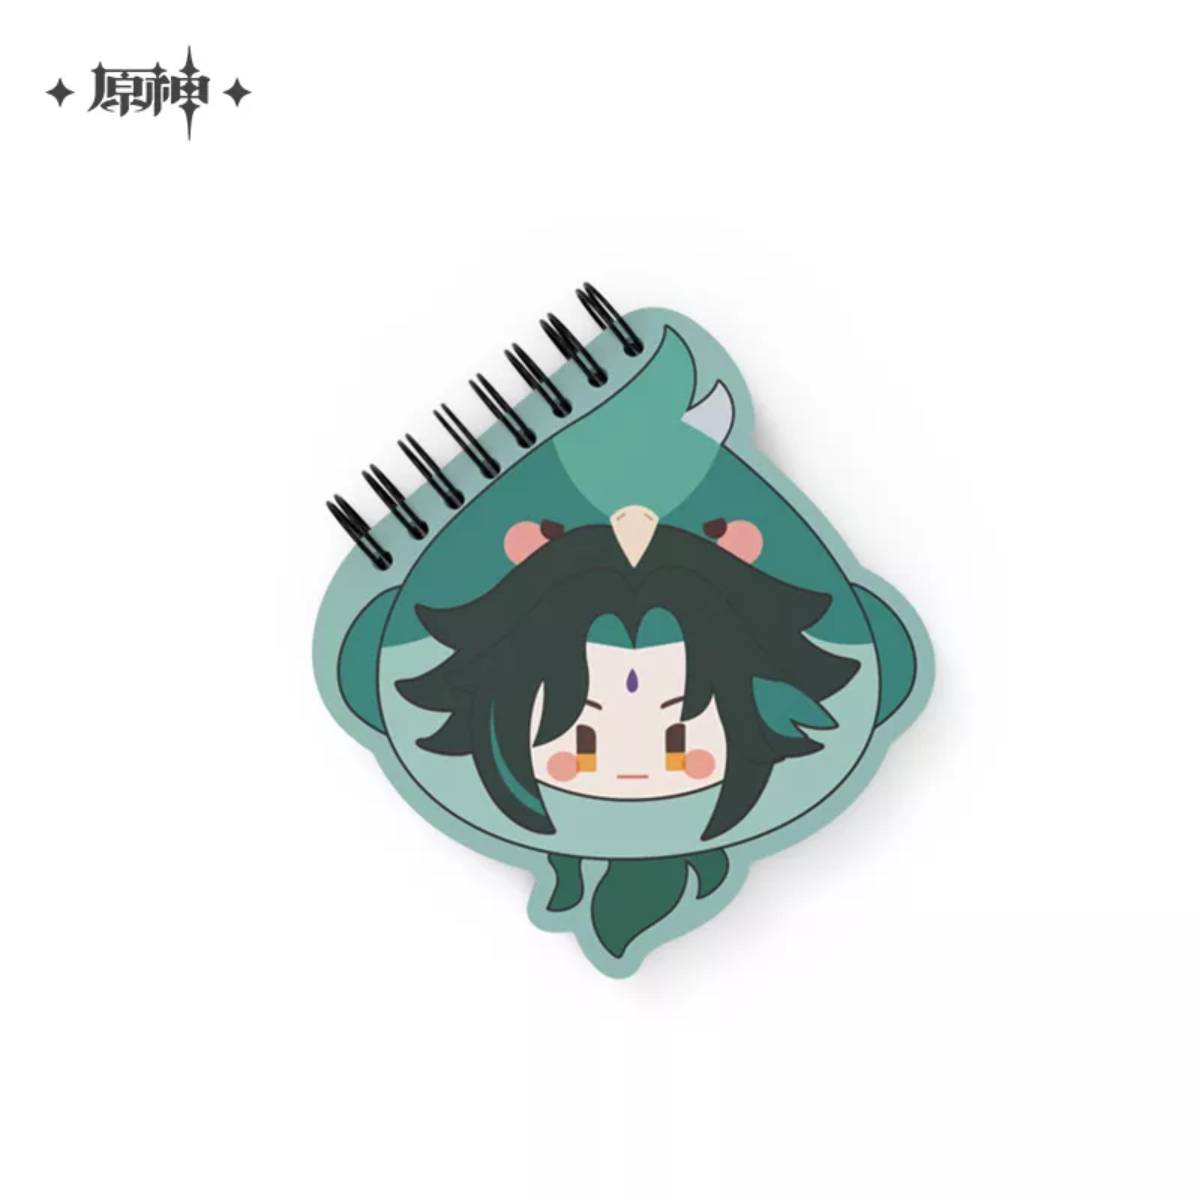 miHoYo Genshin Impact Teyvat Zoo Series Coil Notepad-Xiao-miHoYo-Ace Cards &amp; Collectibles